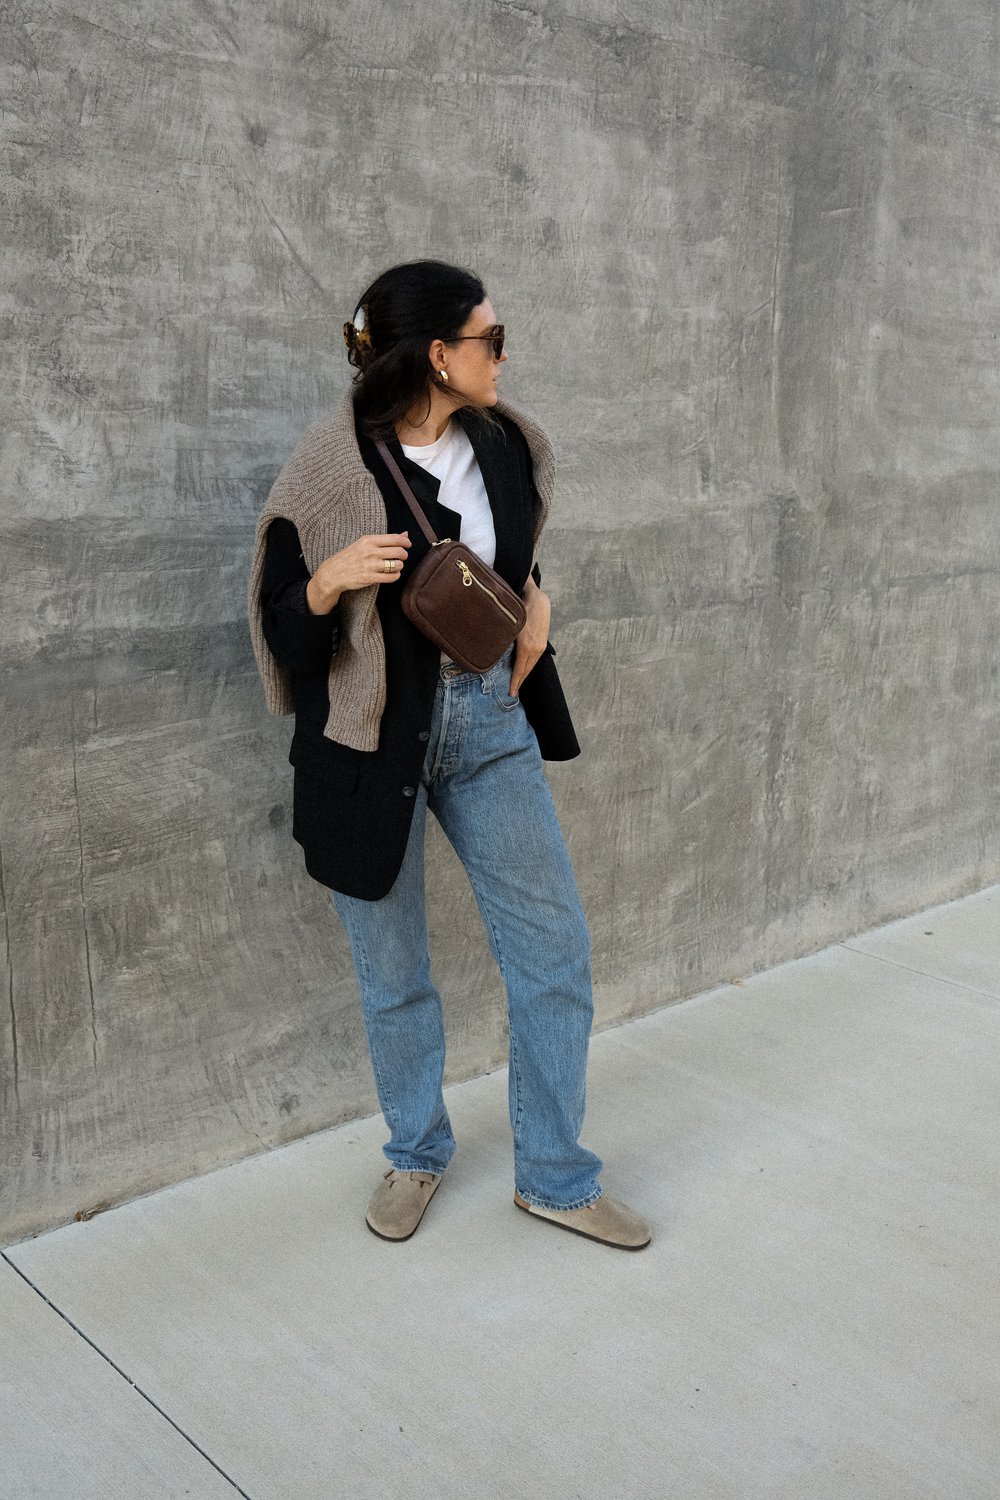 I'm back with my regular Monday morning outfit post from the